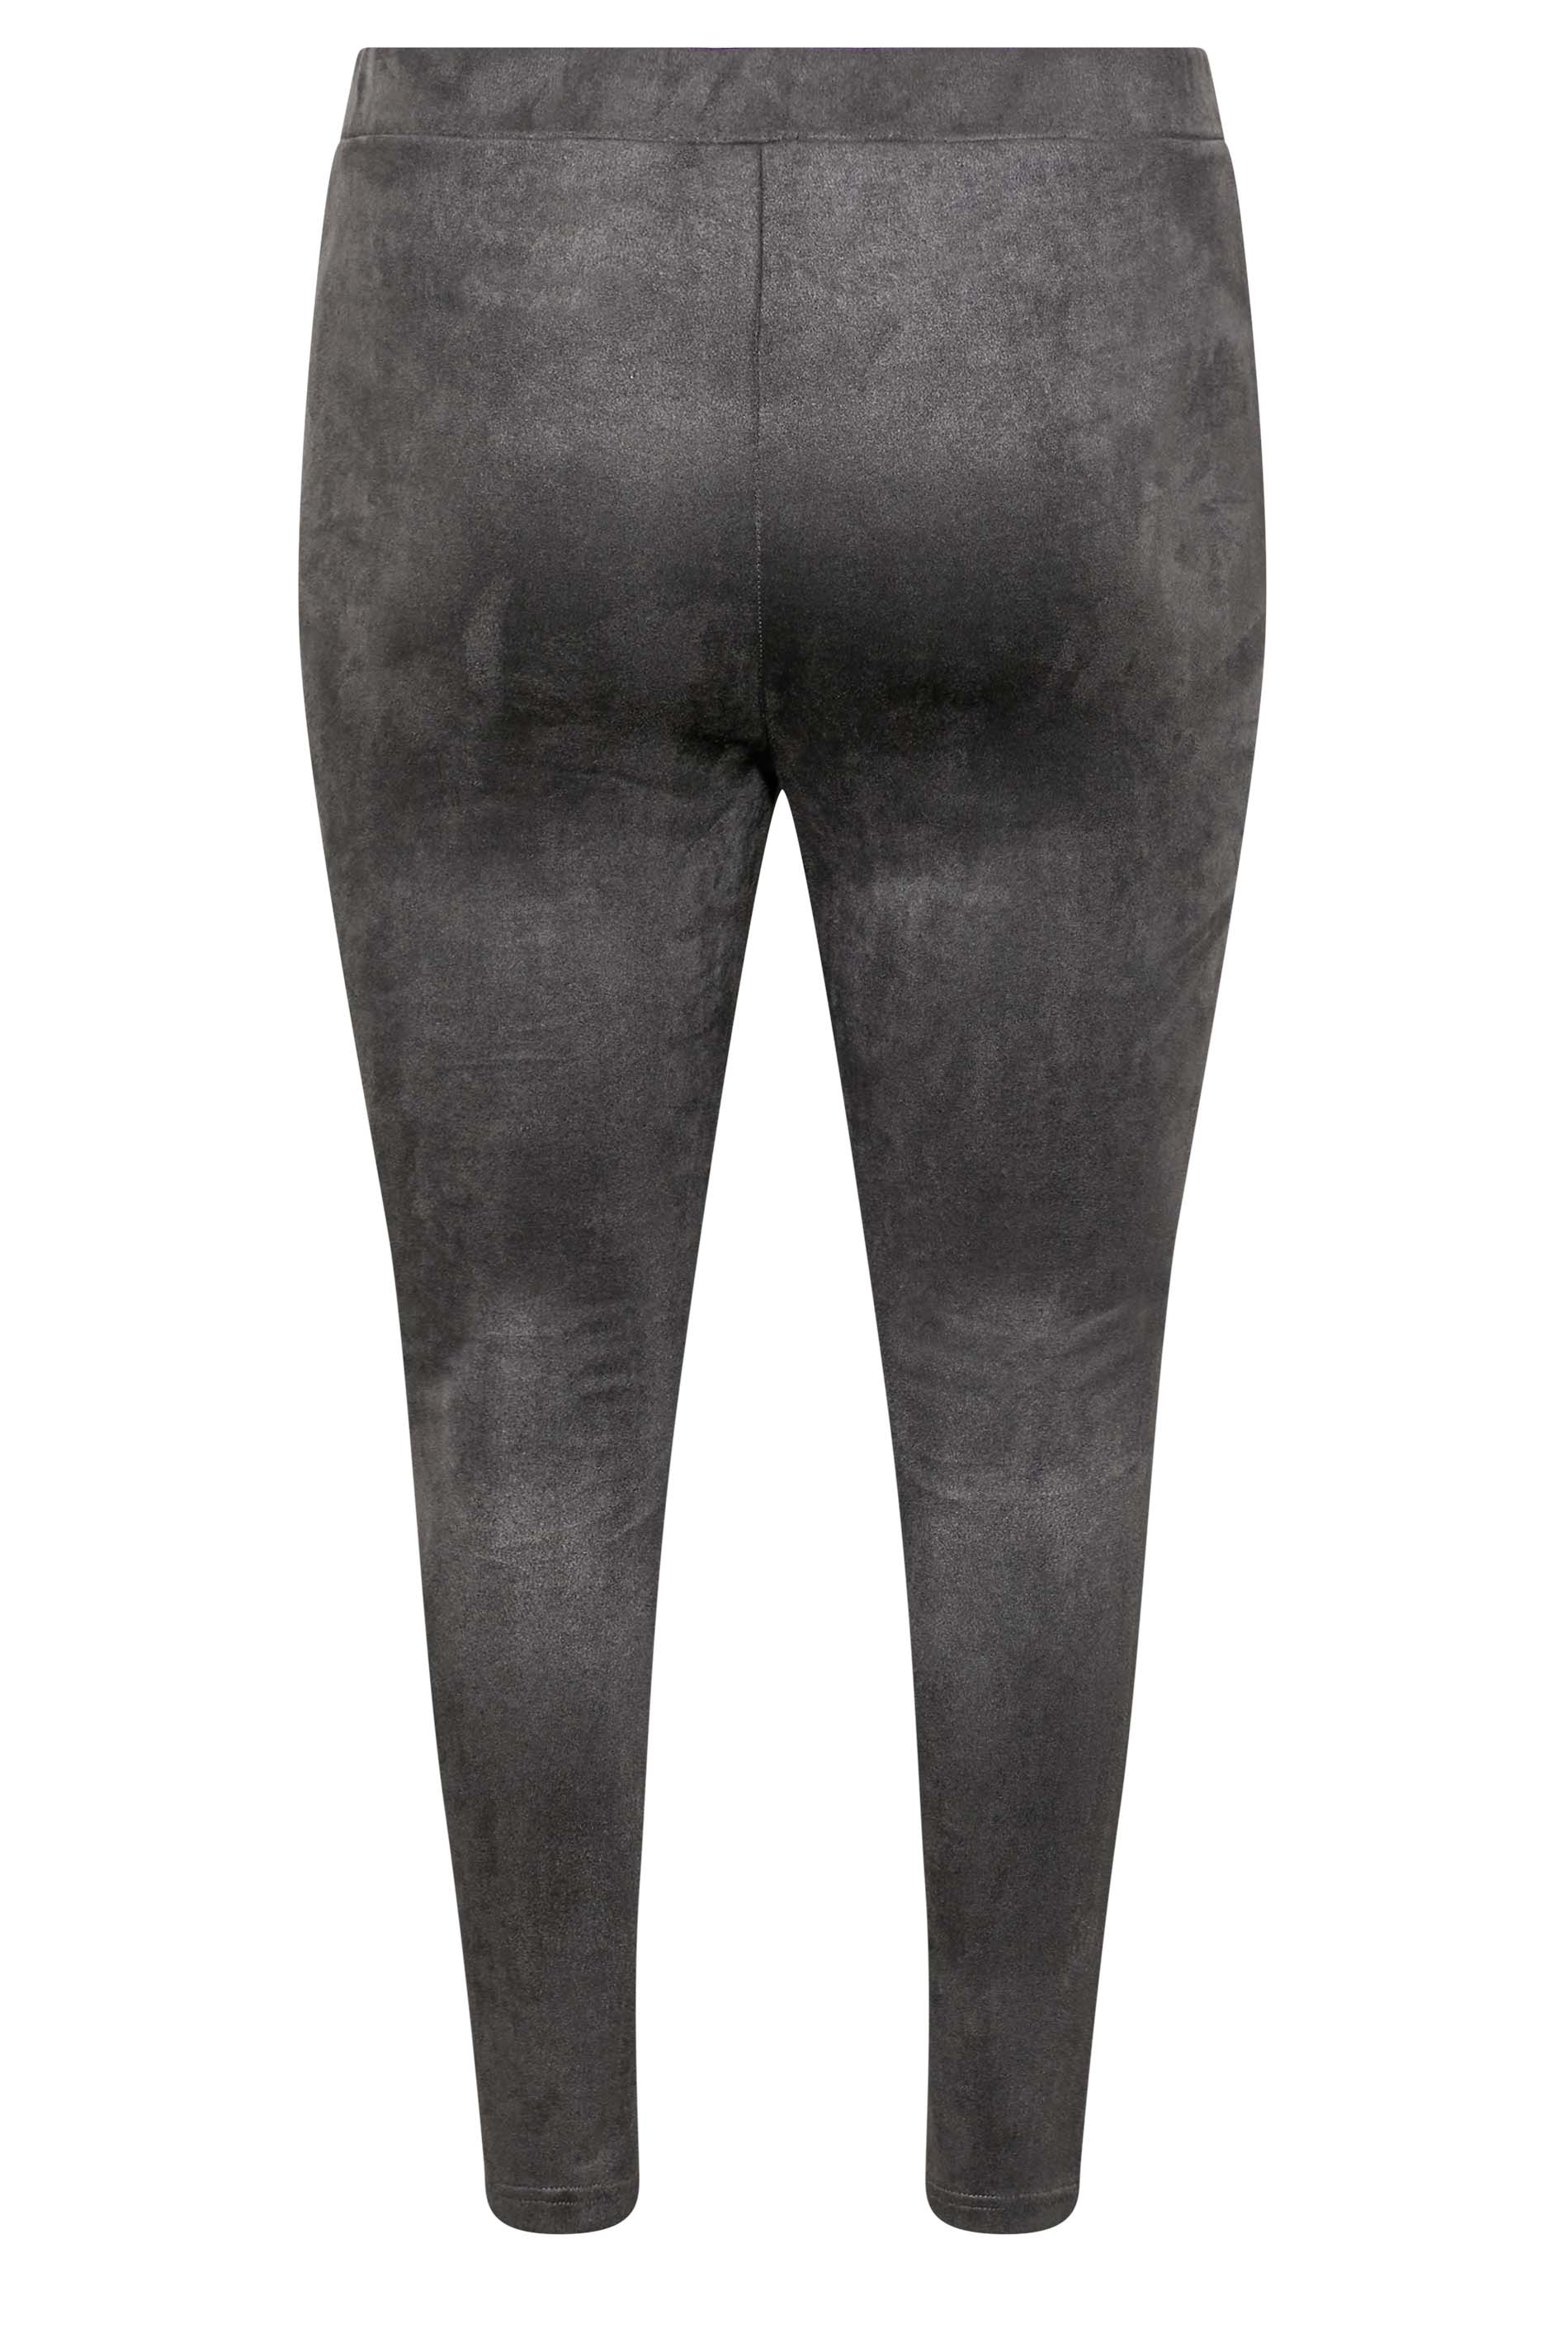 Plus Size Charcoal Grey Faux Suede High Waisted Leggings | Yours Clothing